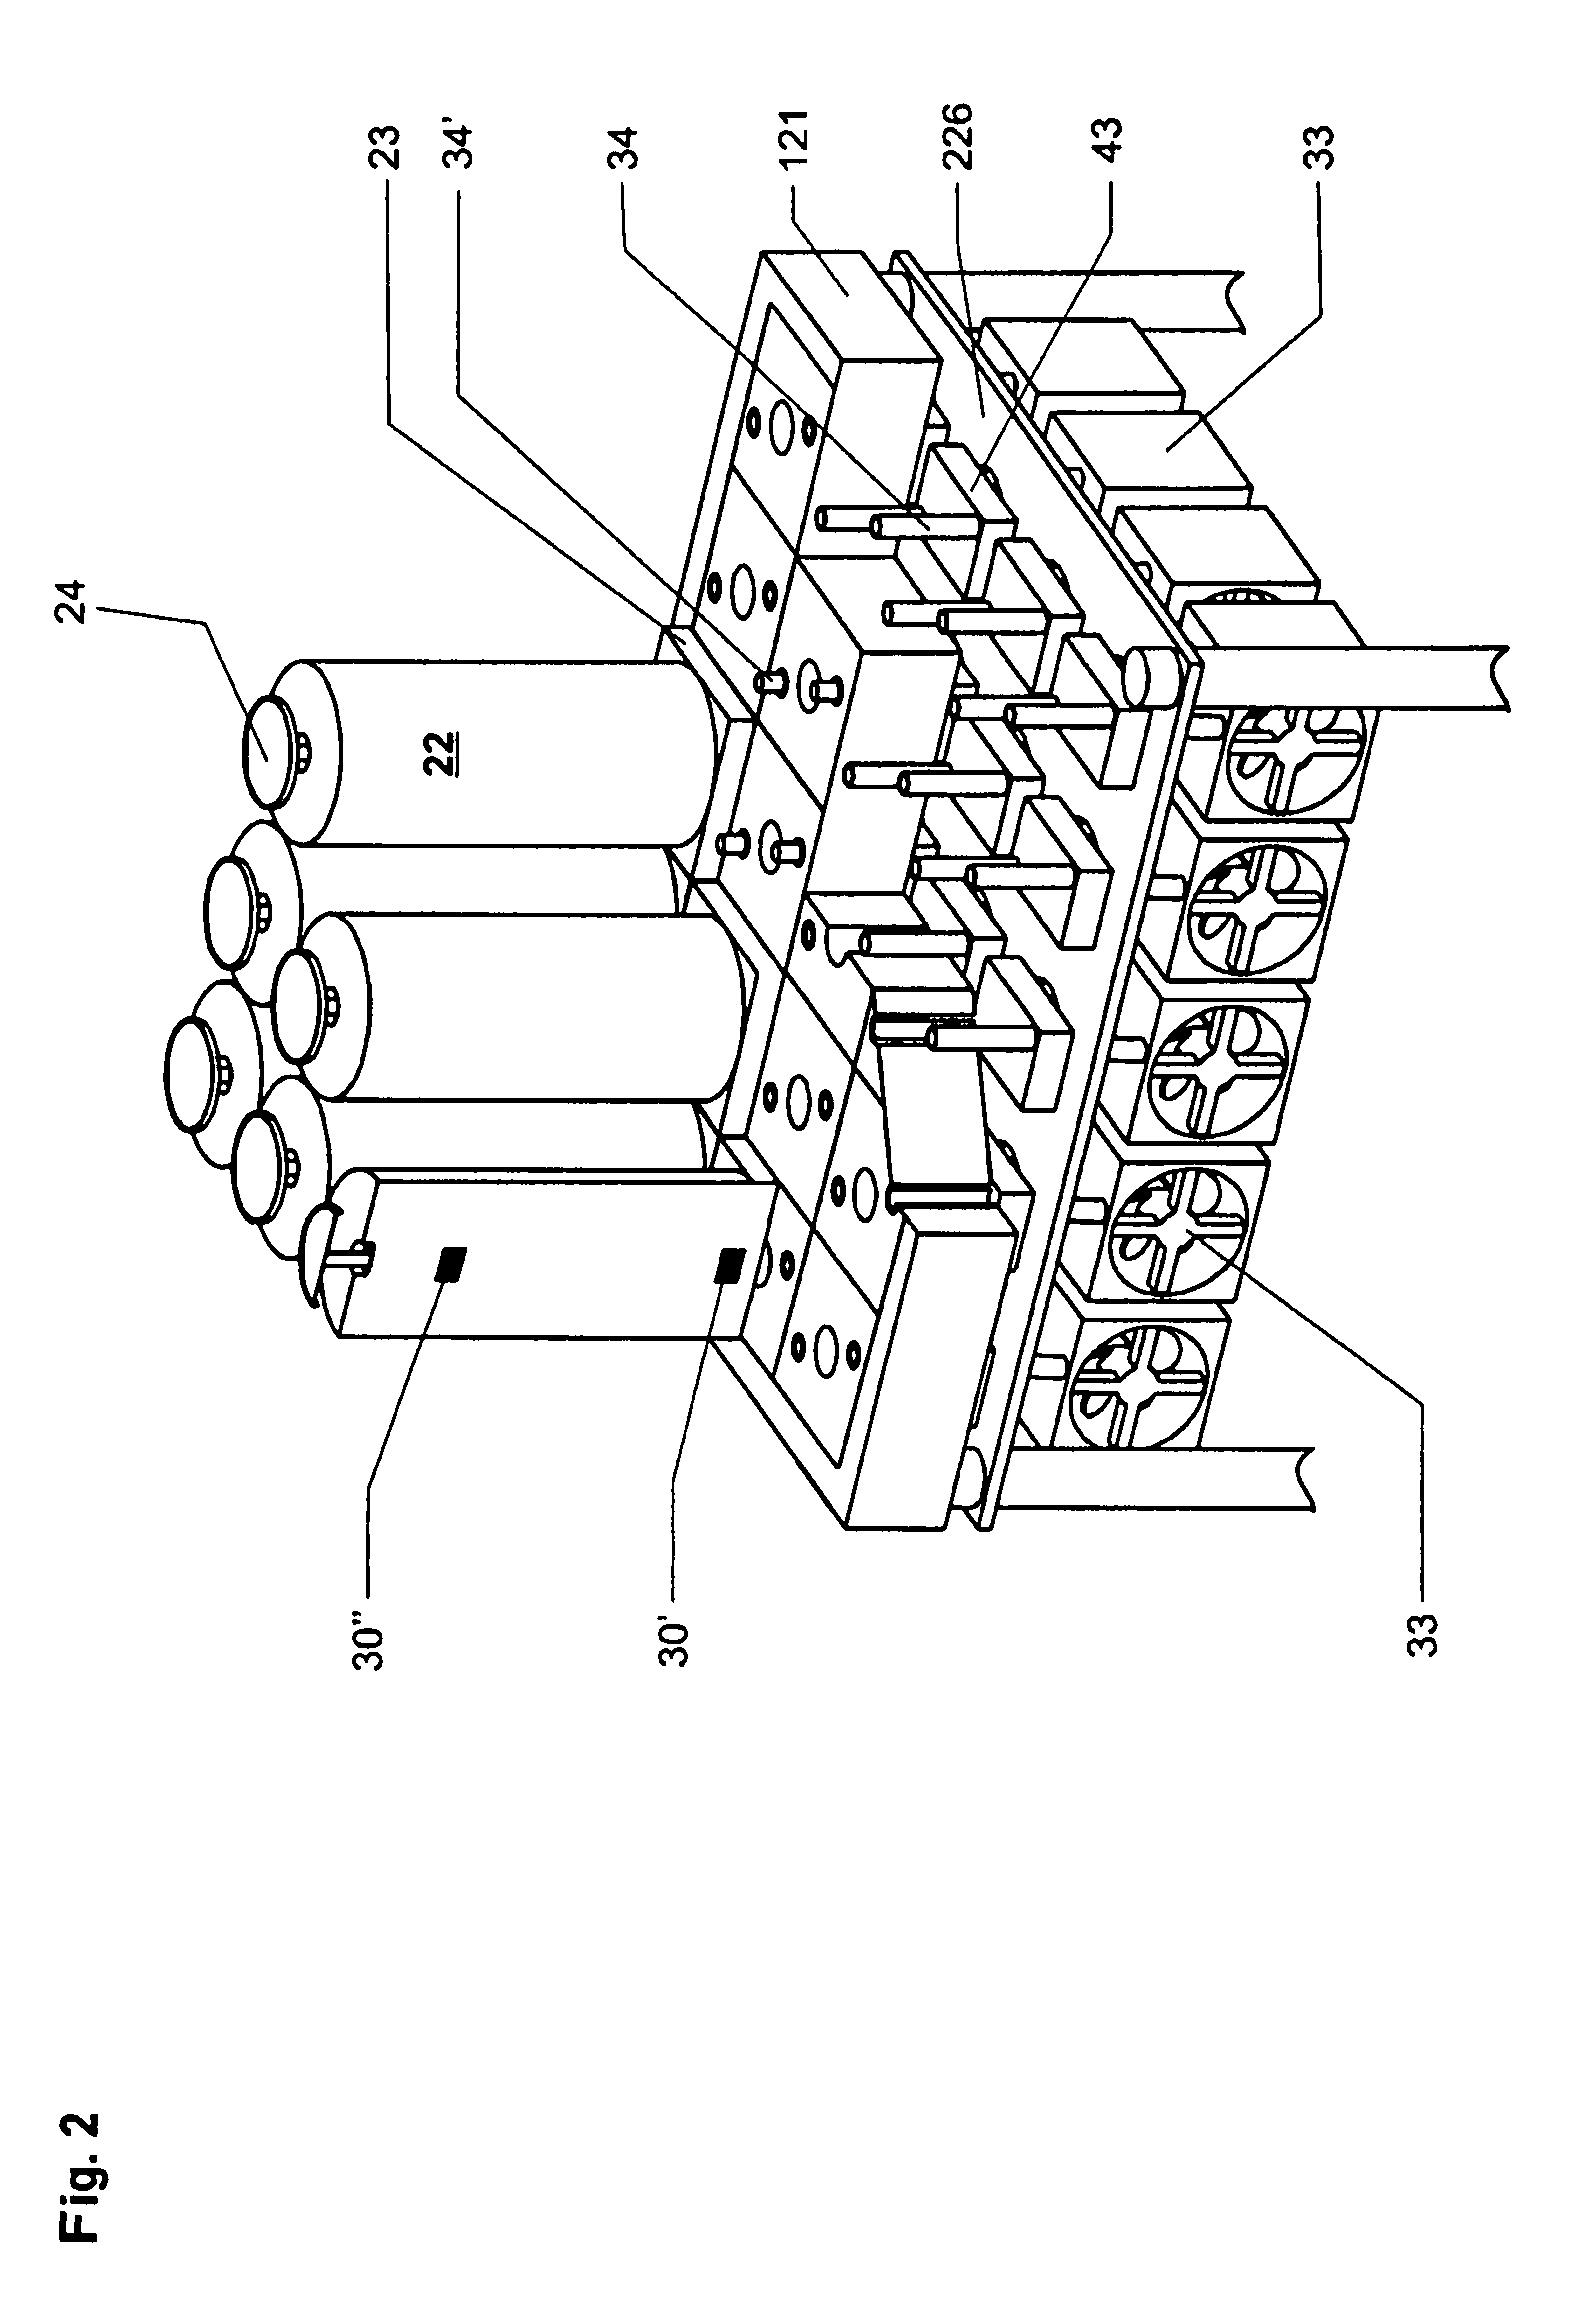 Multi-module weighing system with temperature control